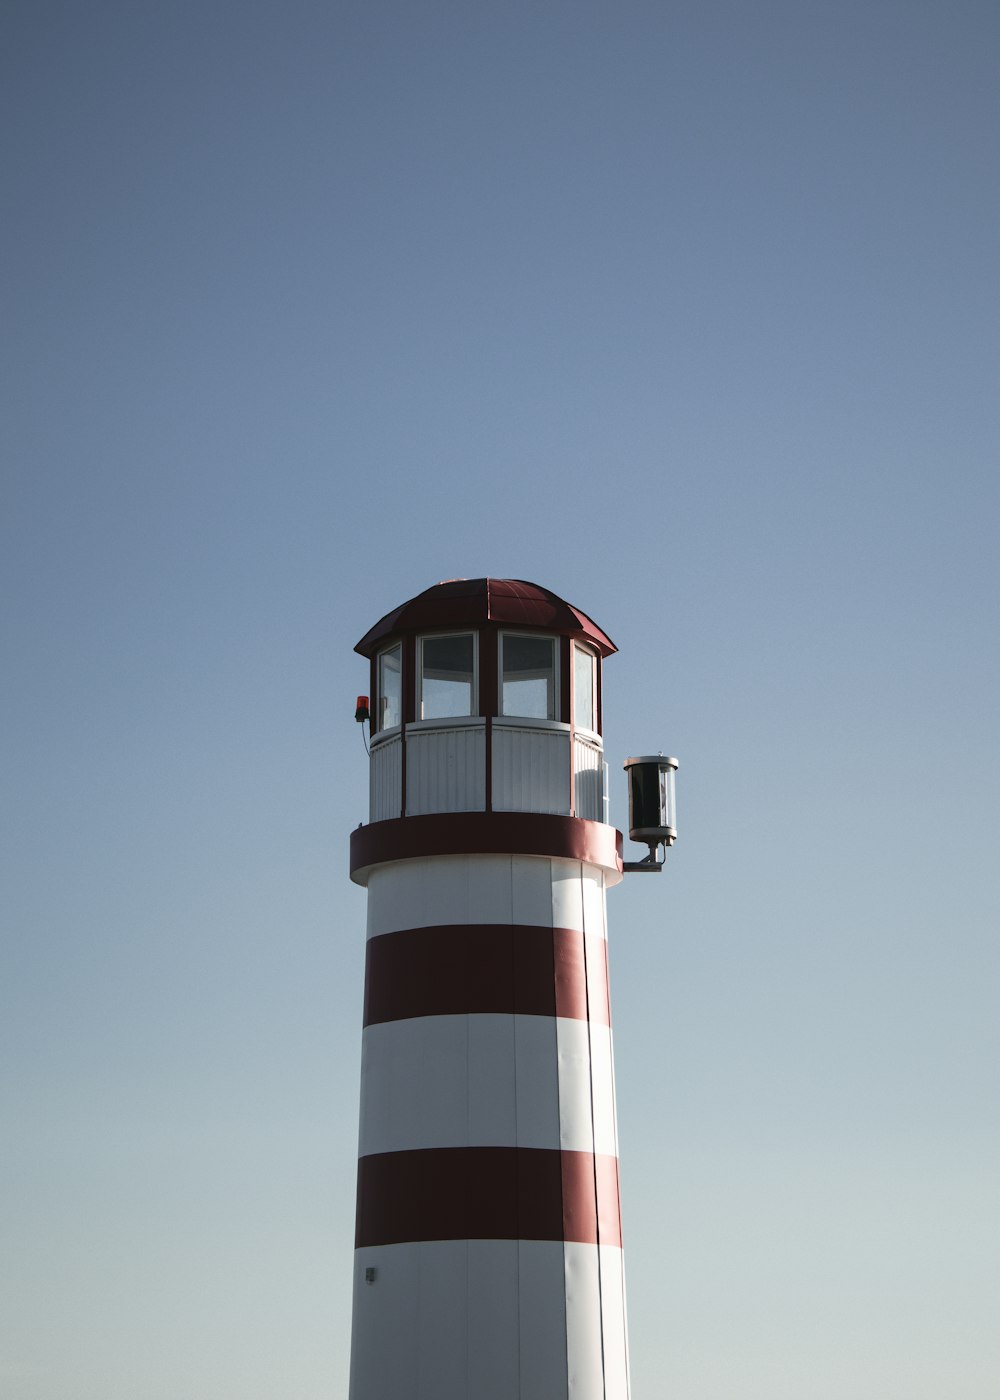 red and white striped lighthouse under blue sky during daytime